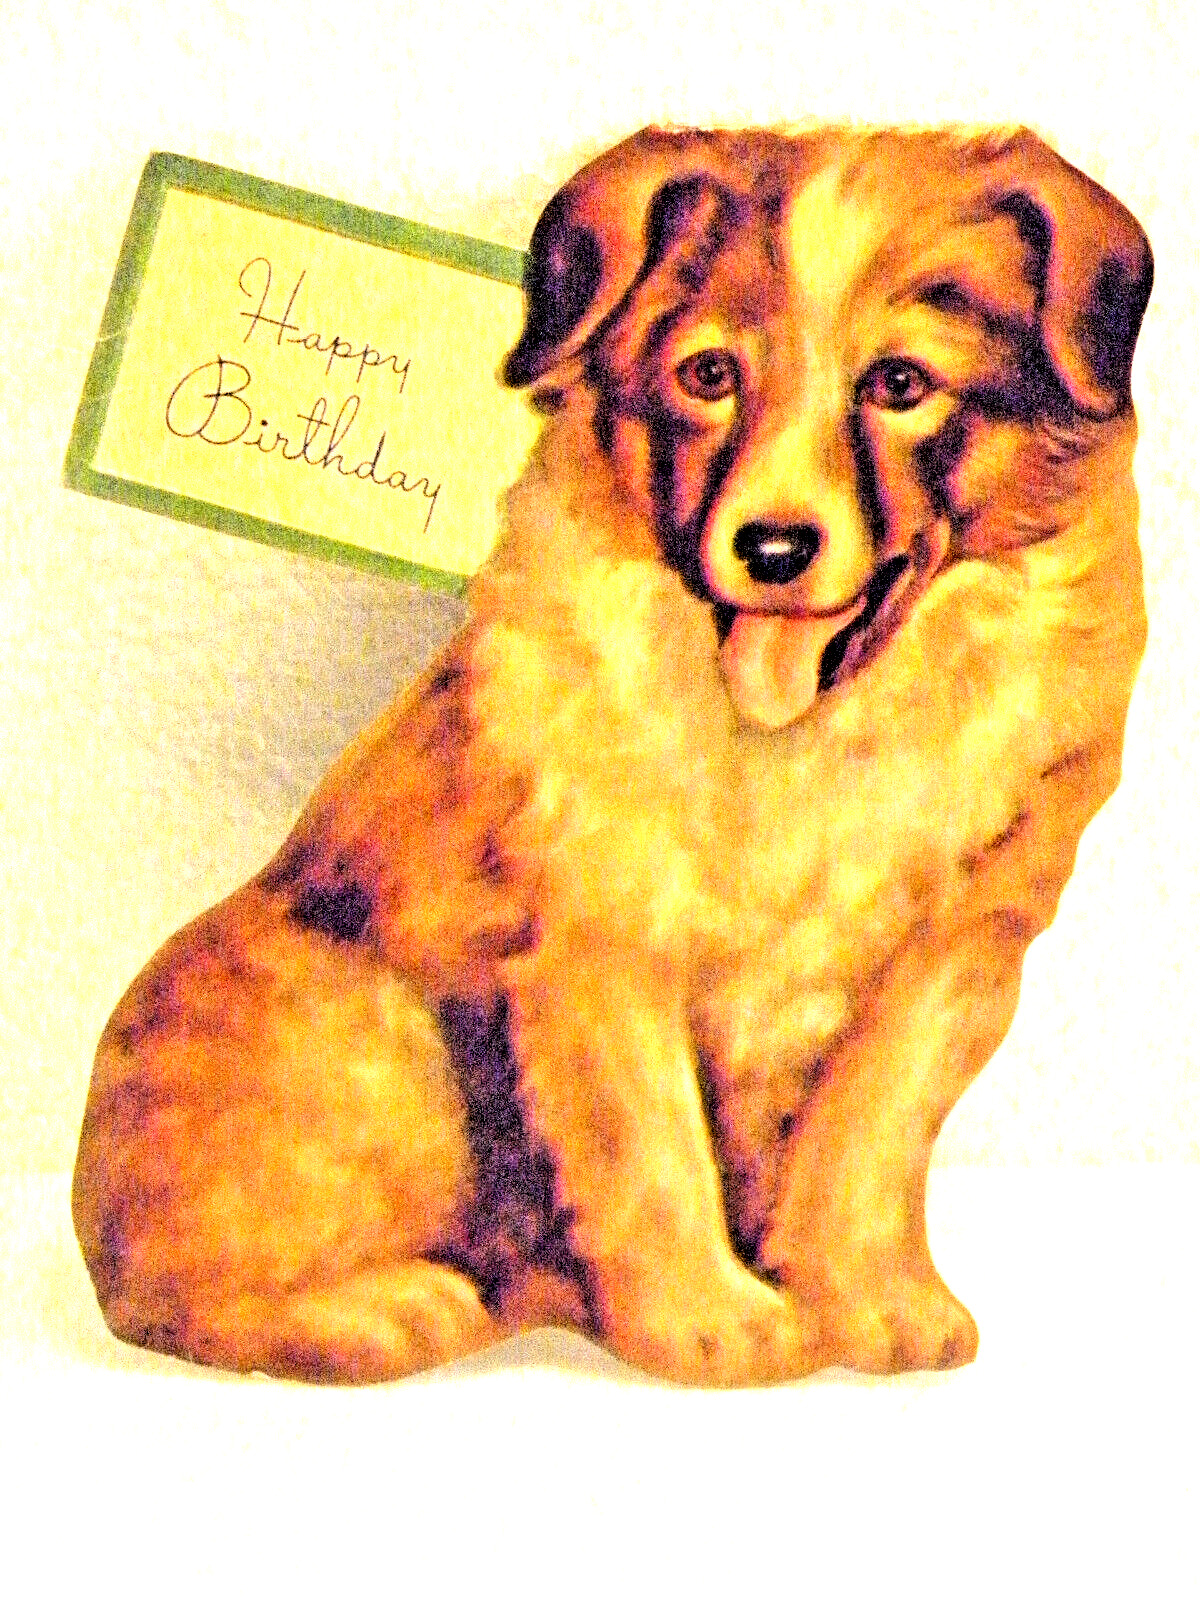 Vintage 1940s Childs Birthday Card. Great Dog Picture Used    B2